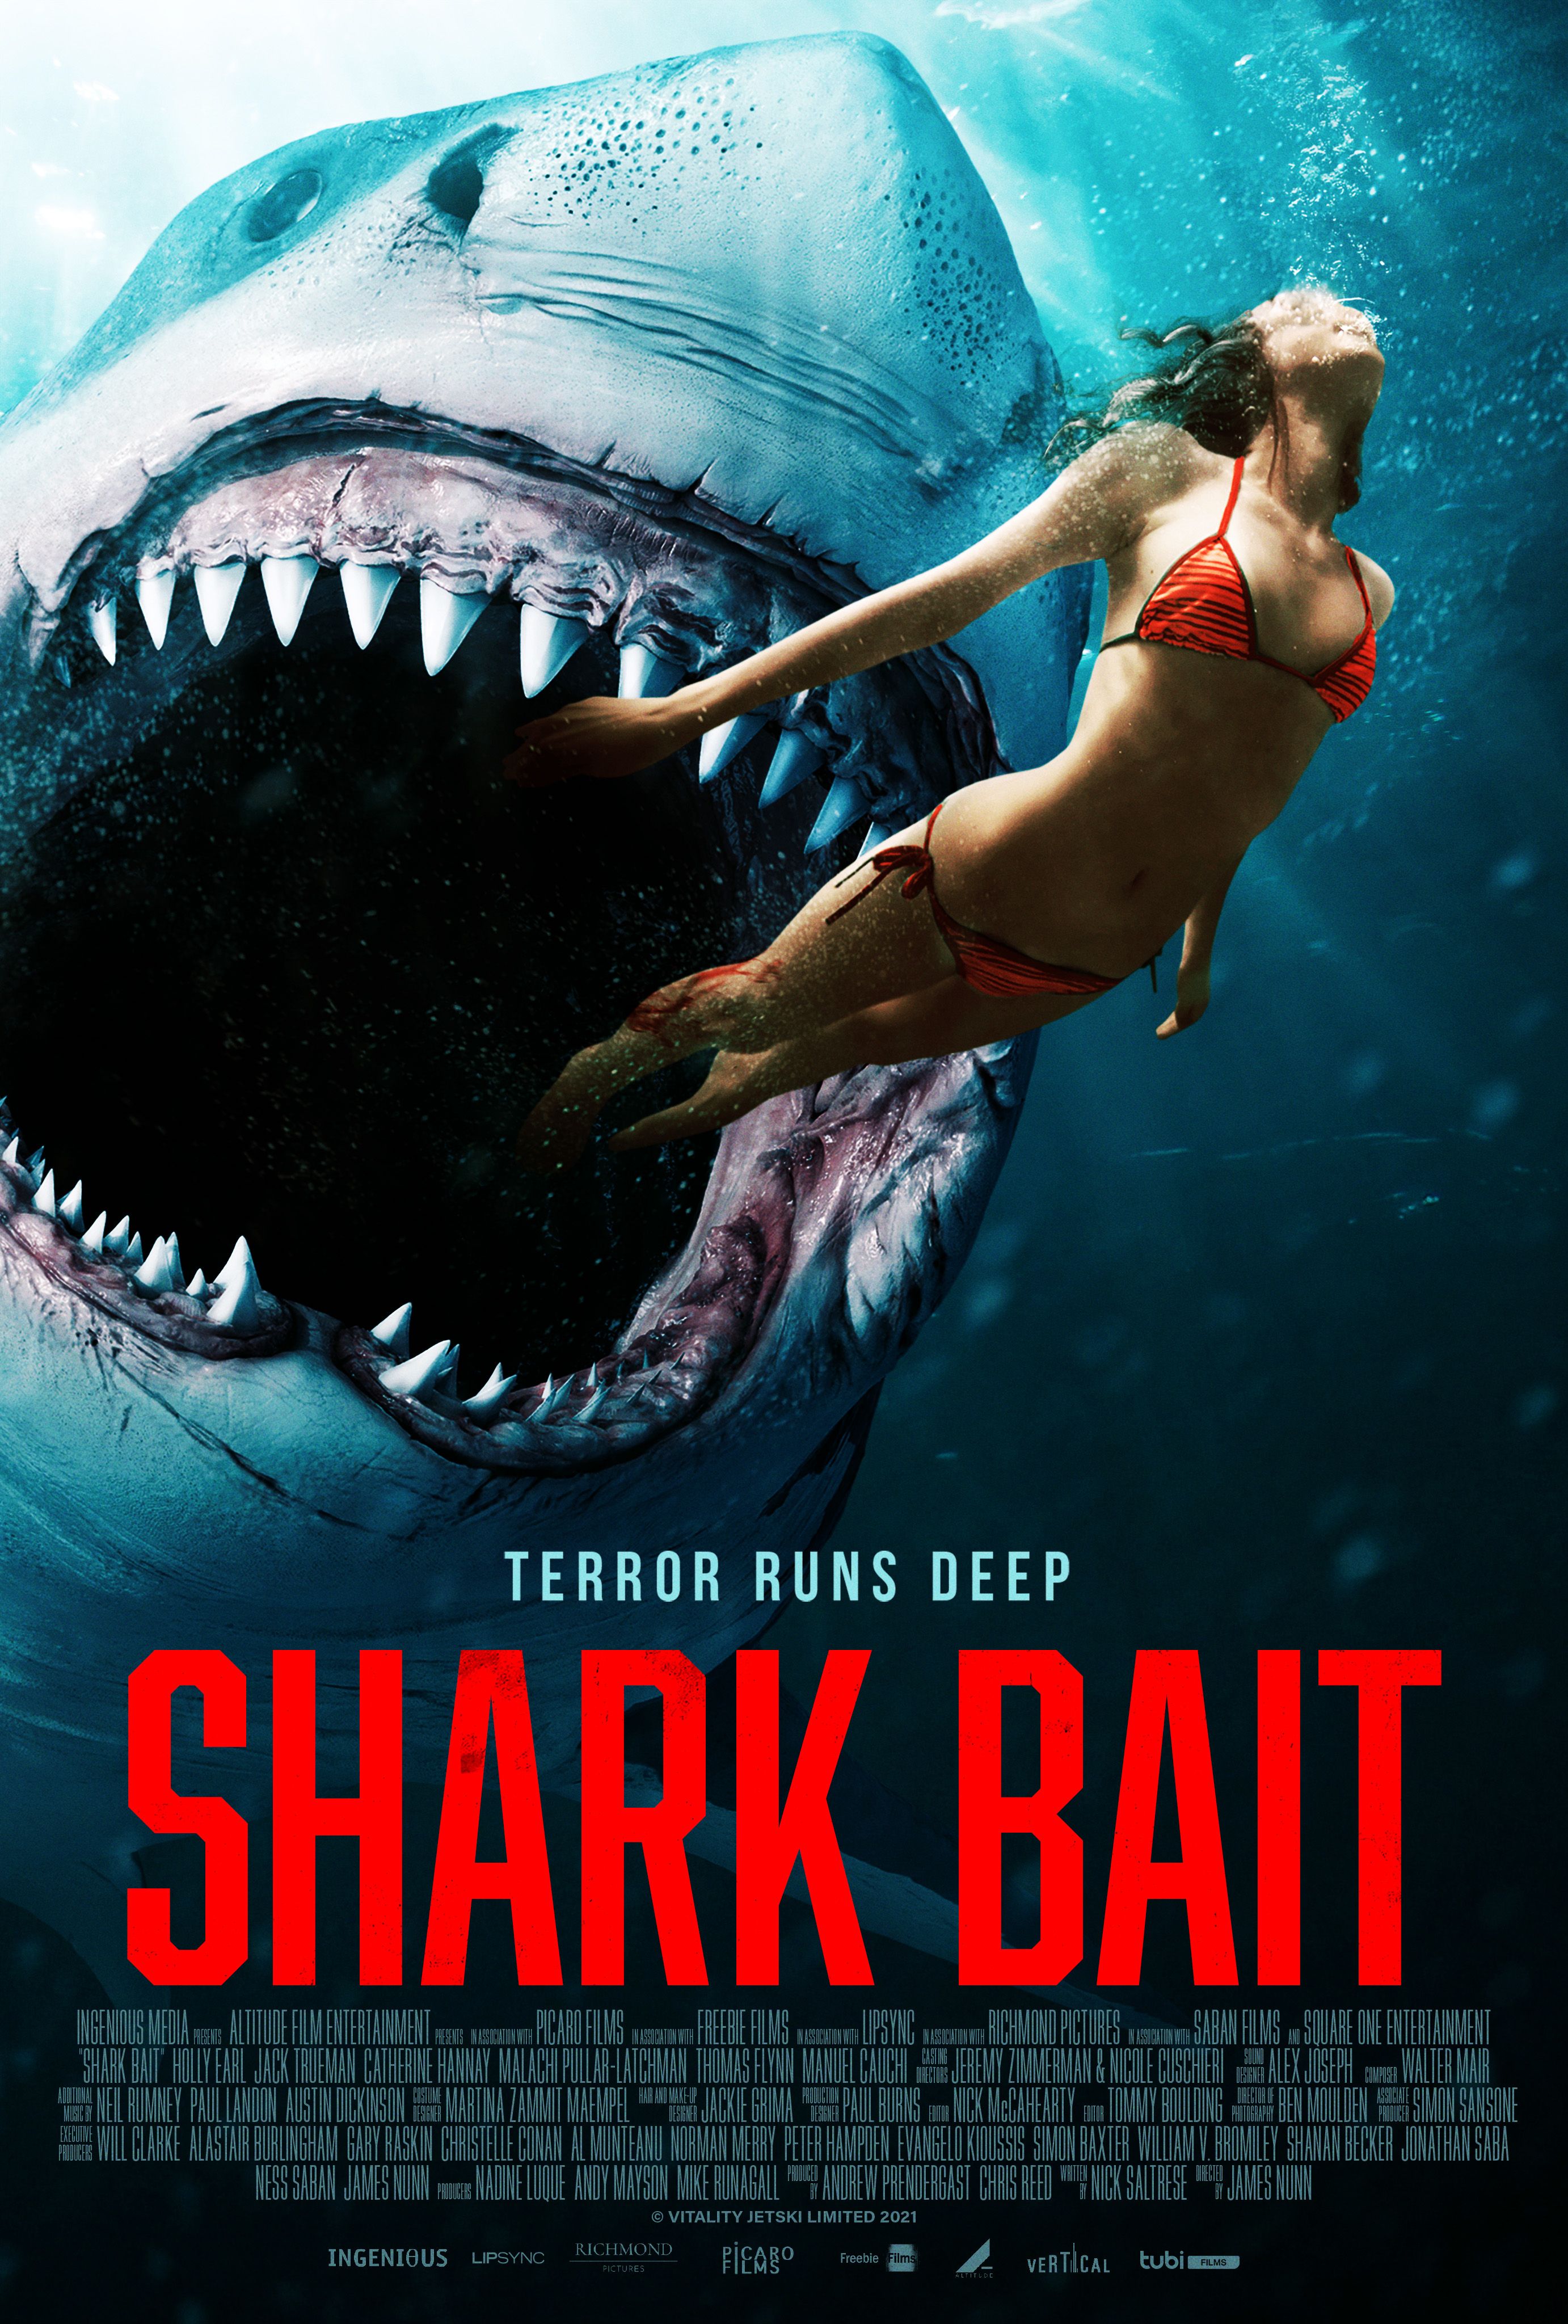 Shark Bait New Trailer & Poster Revealed [EXCLUSIVE]